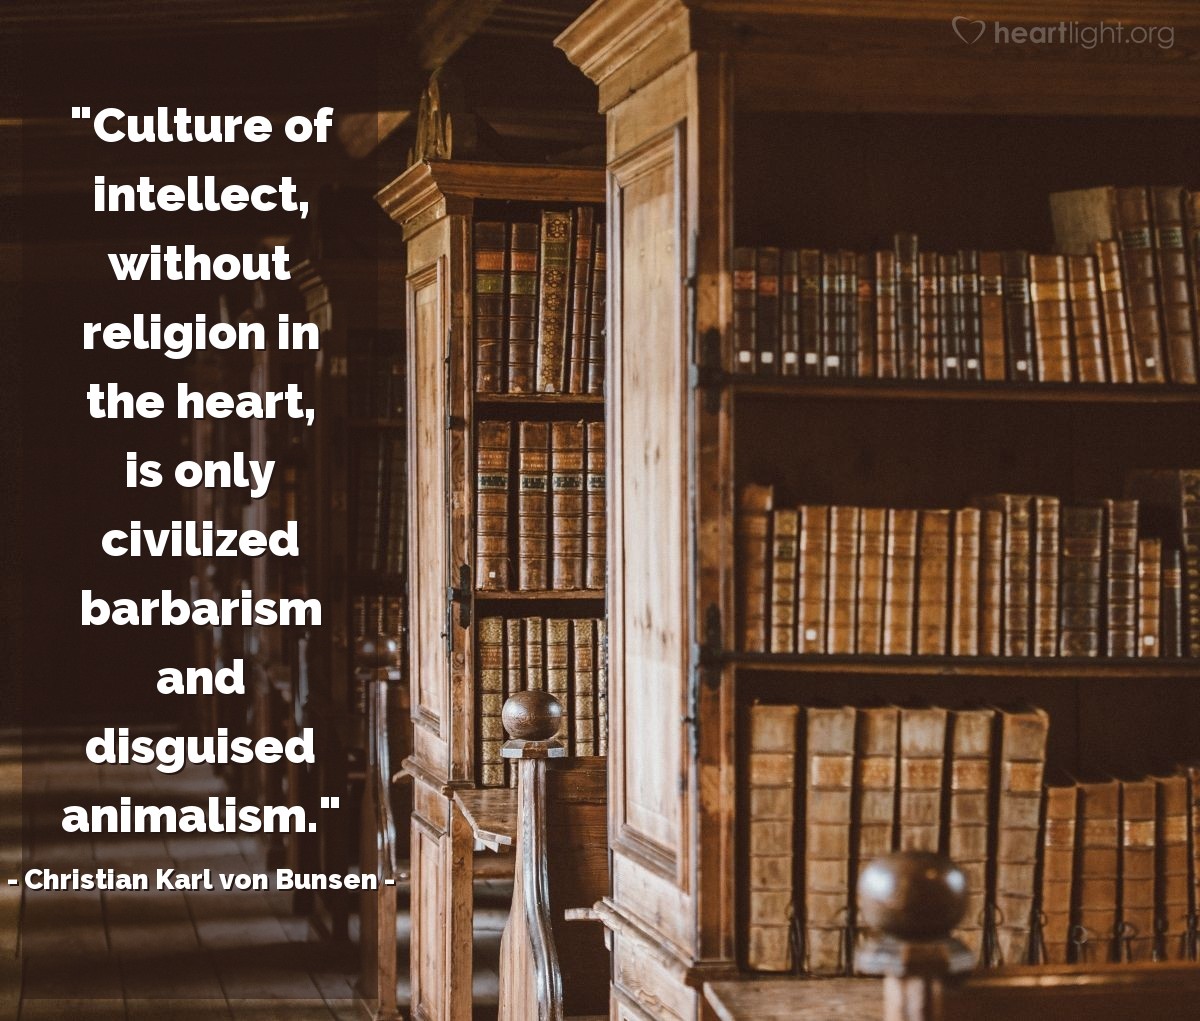 Illustration of Christian Karl von Bunsen — "Culture of intellect, without religion in the heart, is only civilized barbarism and disguised animalism."